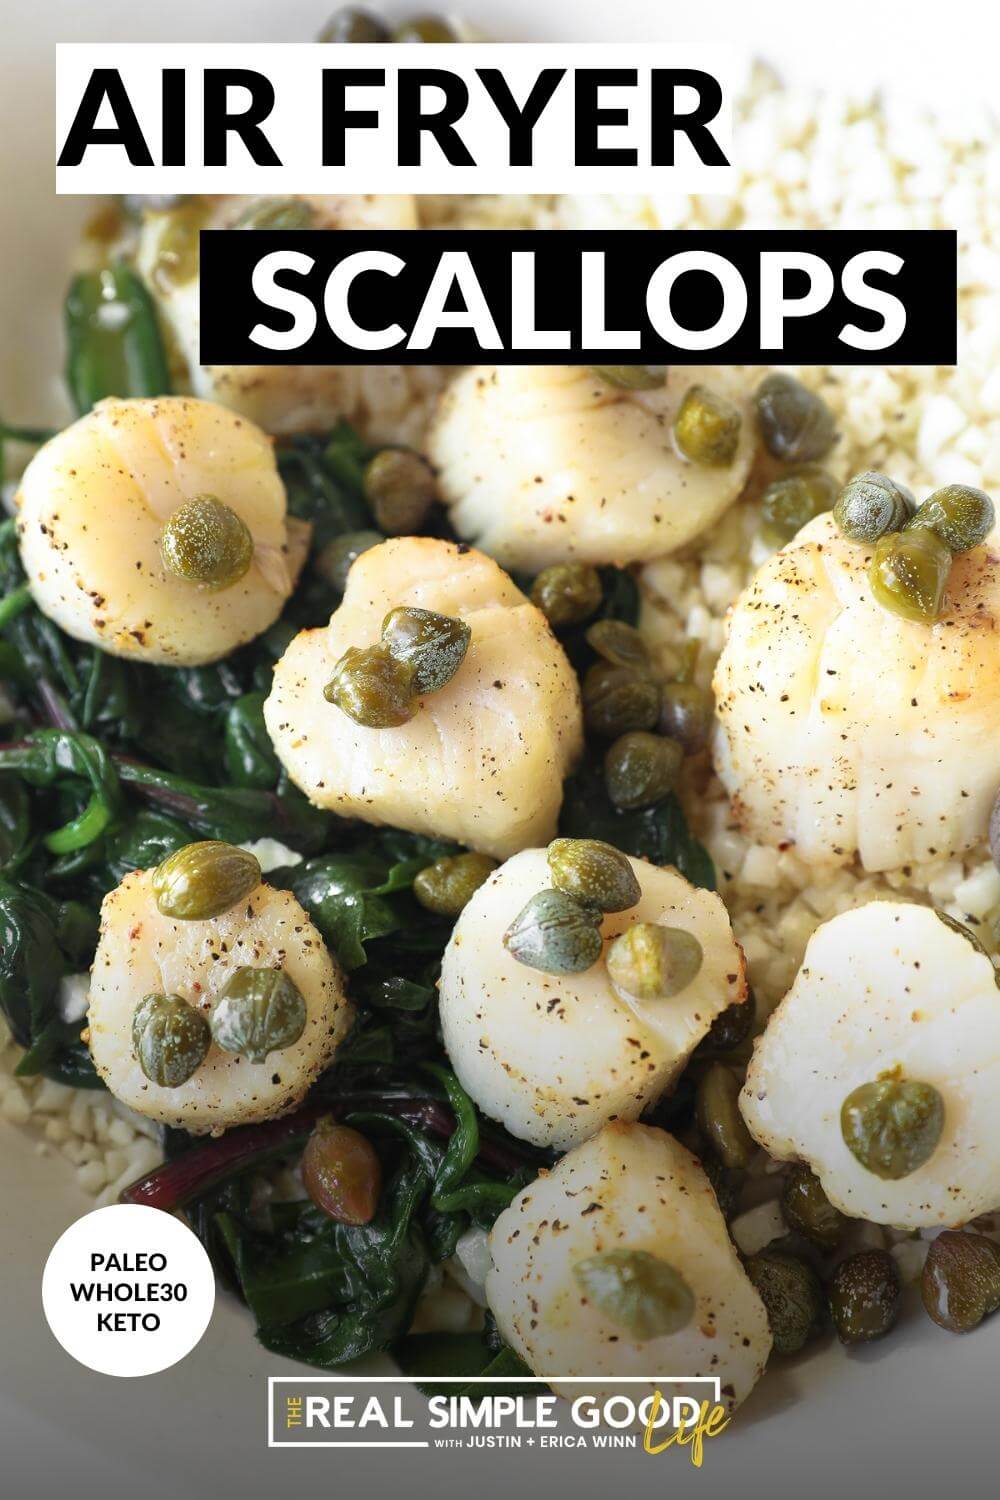 Air fryer scallops over wilted greens and cauliflower rice with text overlay at top.